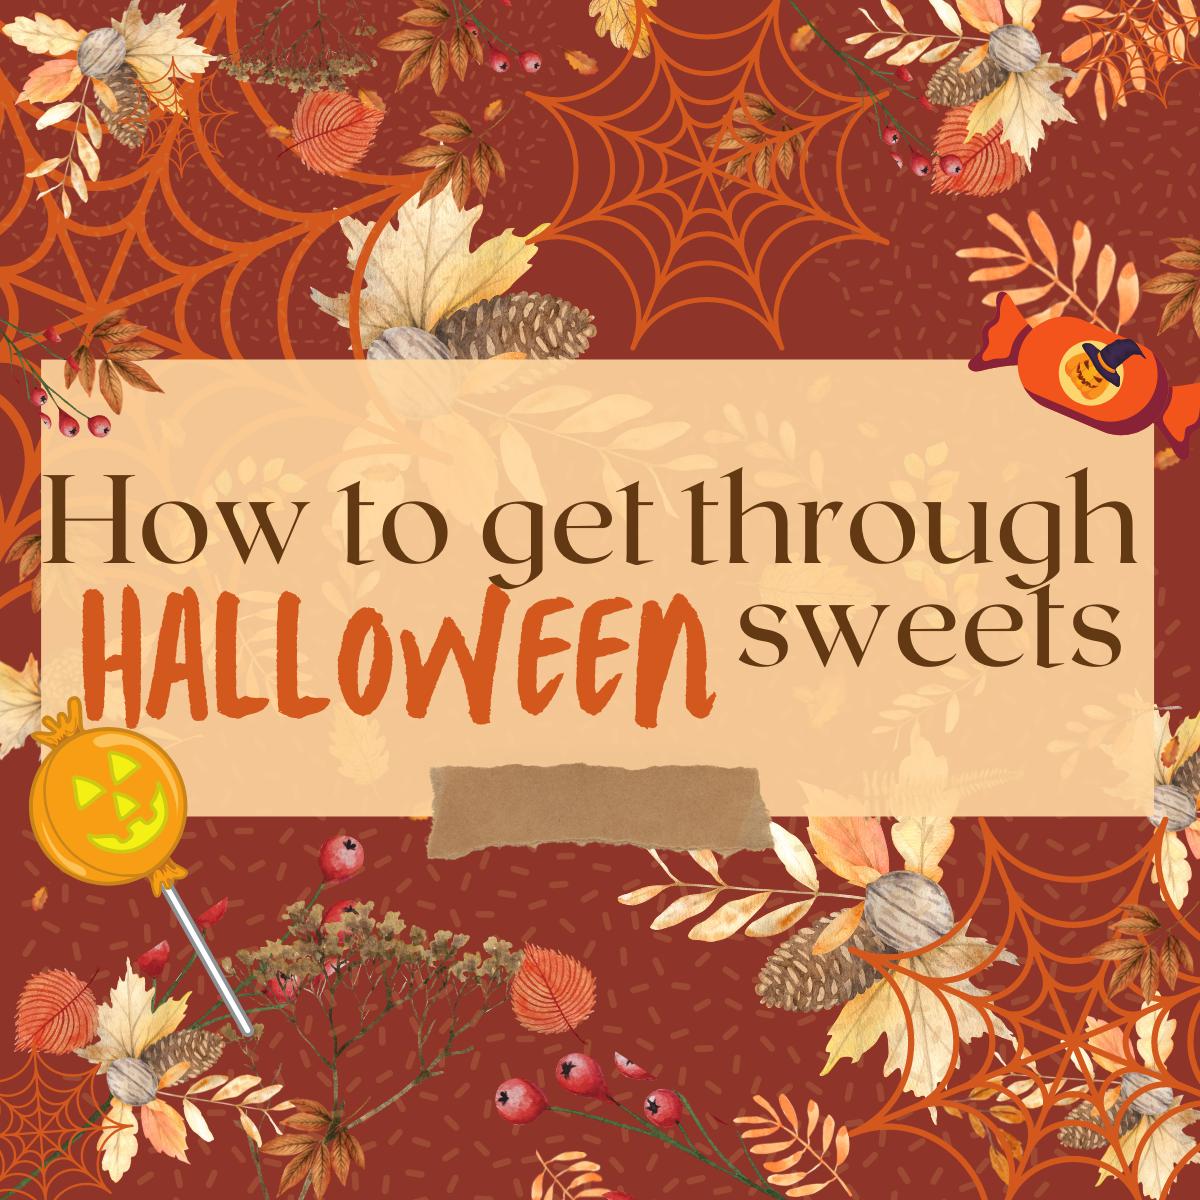 How to get through Halloween sweets and what to do instead?